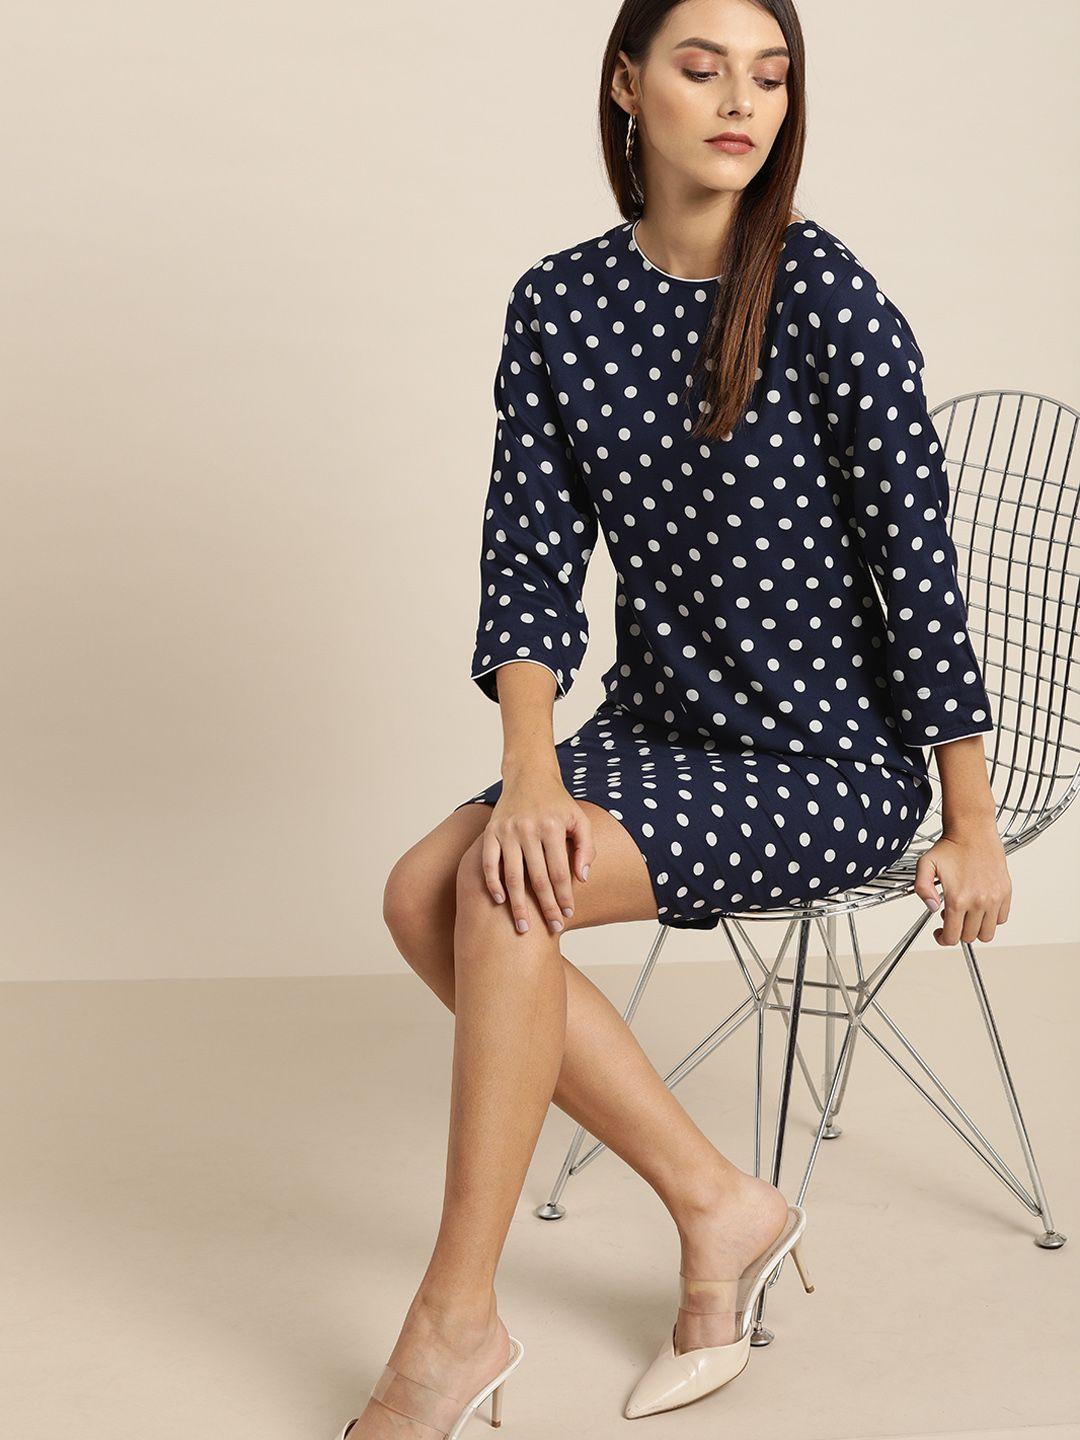 her by invictus women navy blue & off-white polka dots printed sheath dress